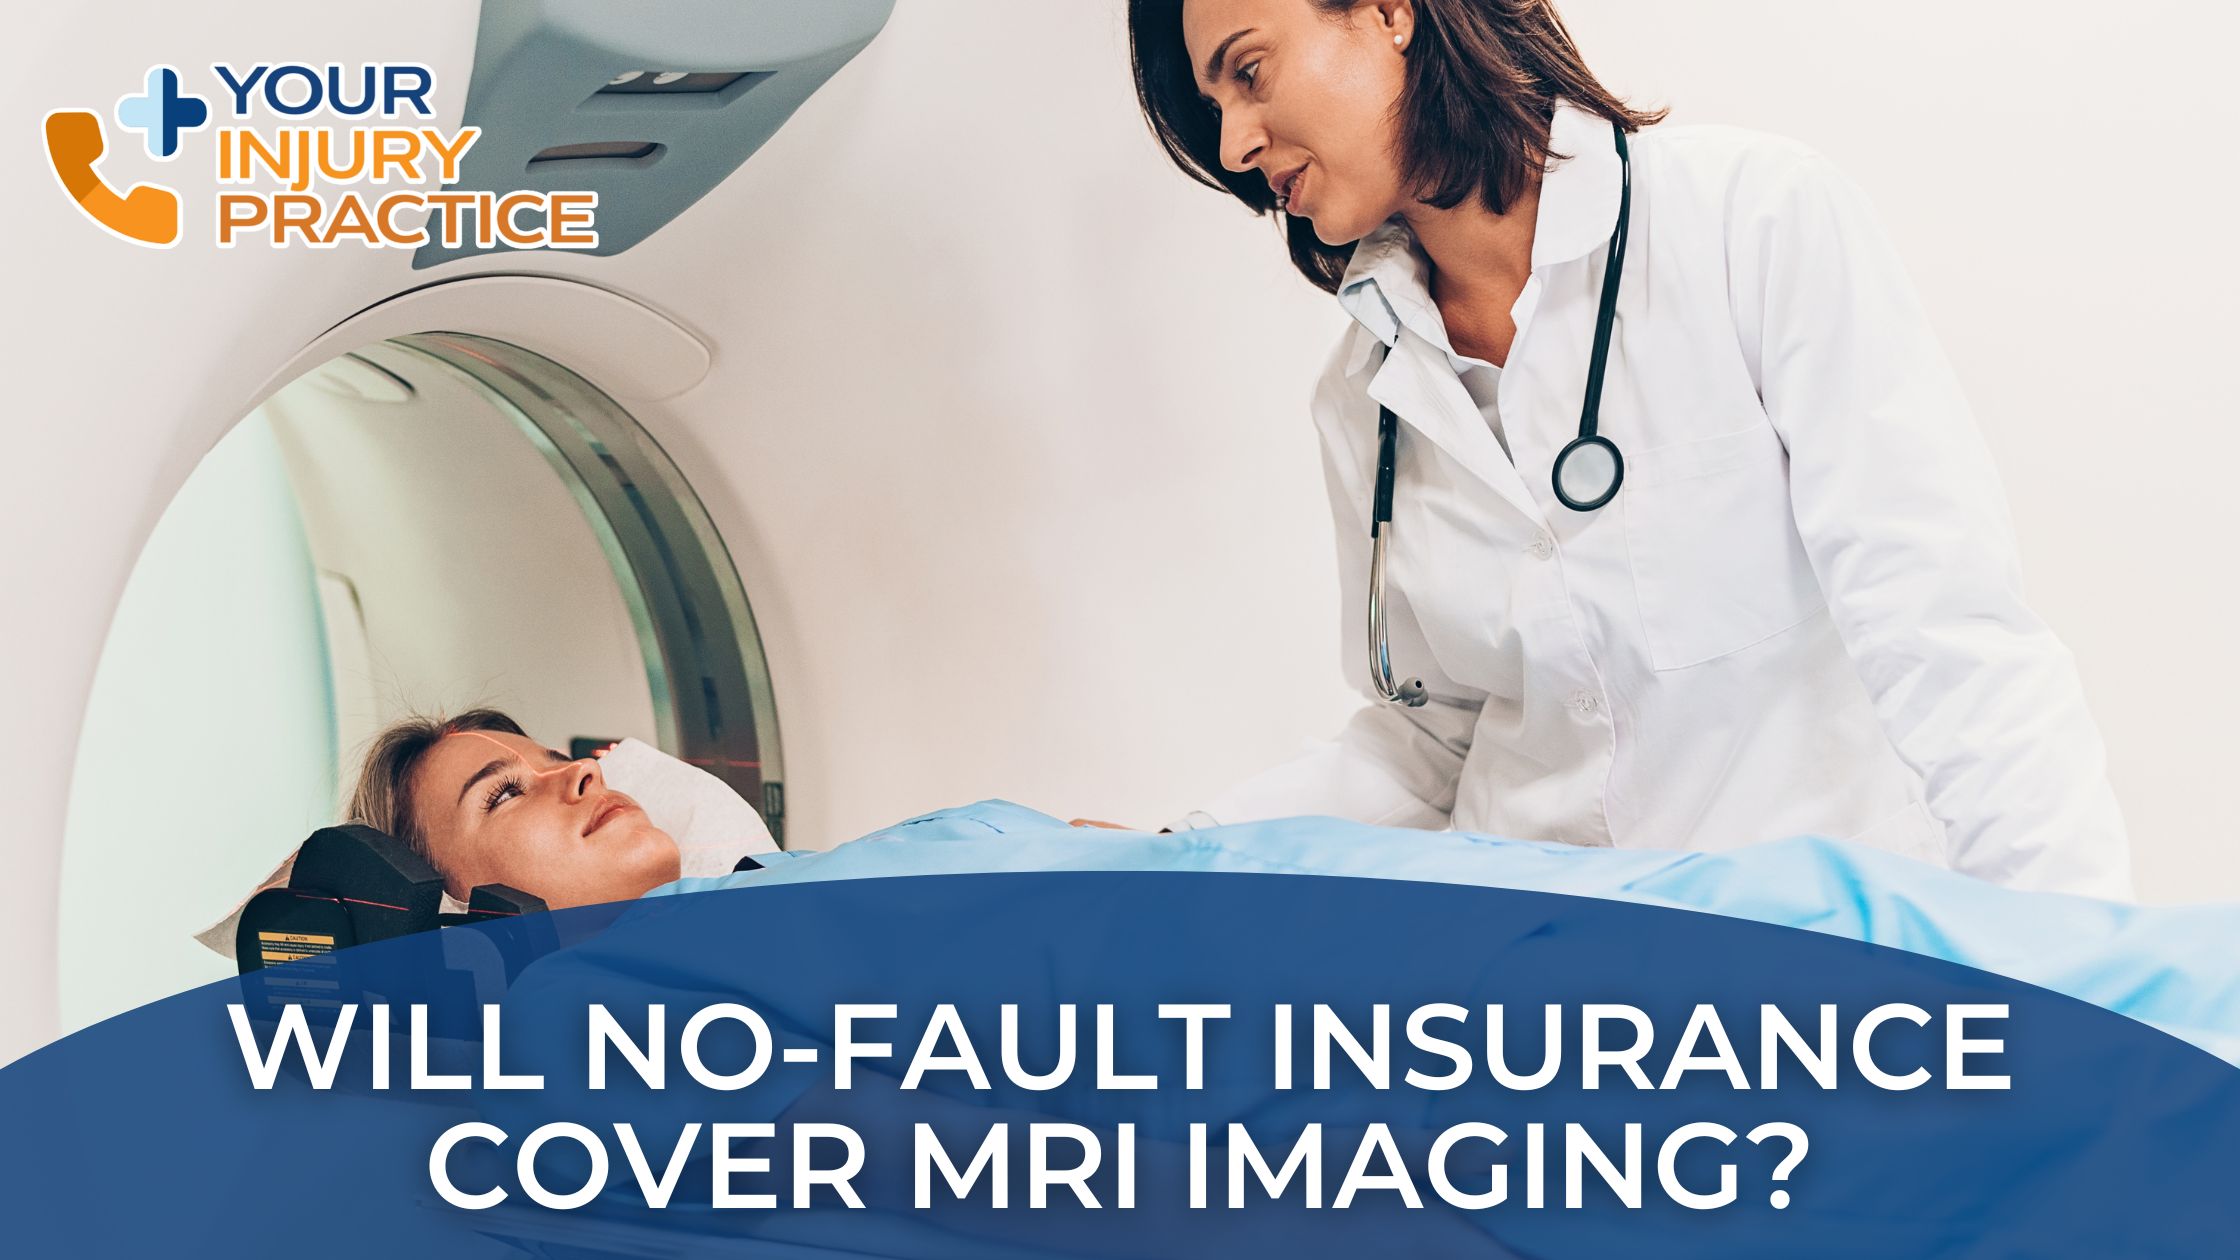 Does no-fault insurance cover MRI imaging?